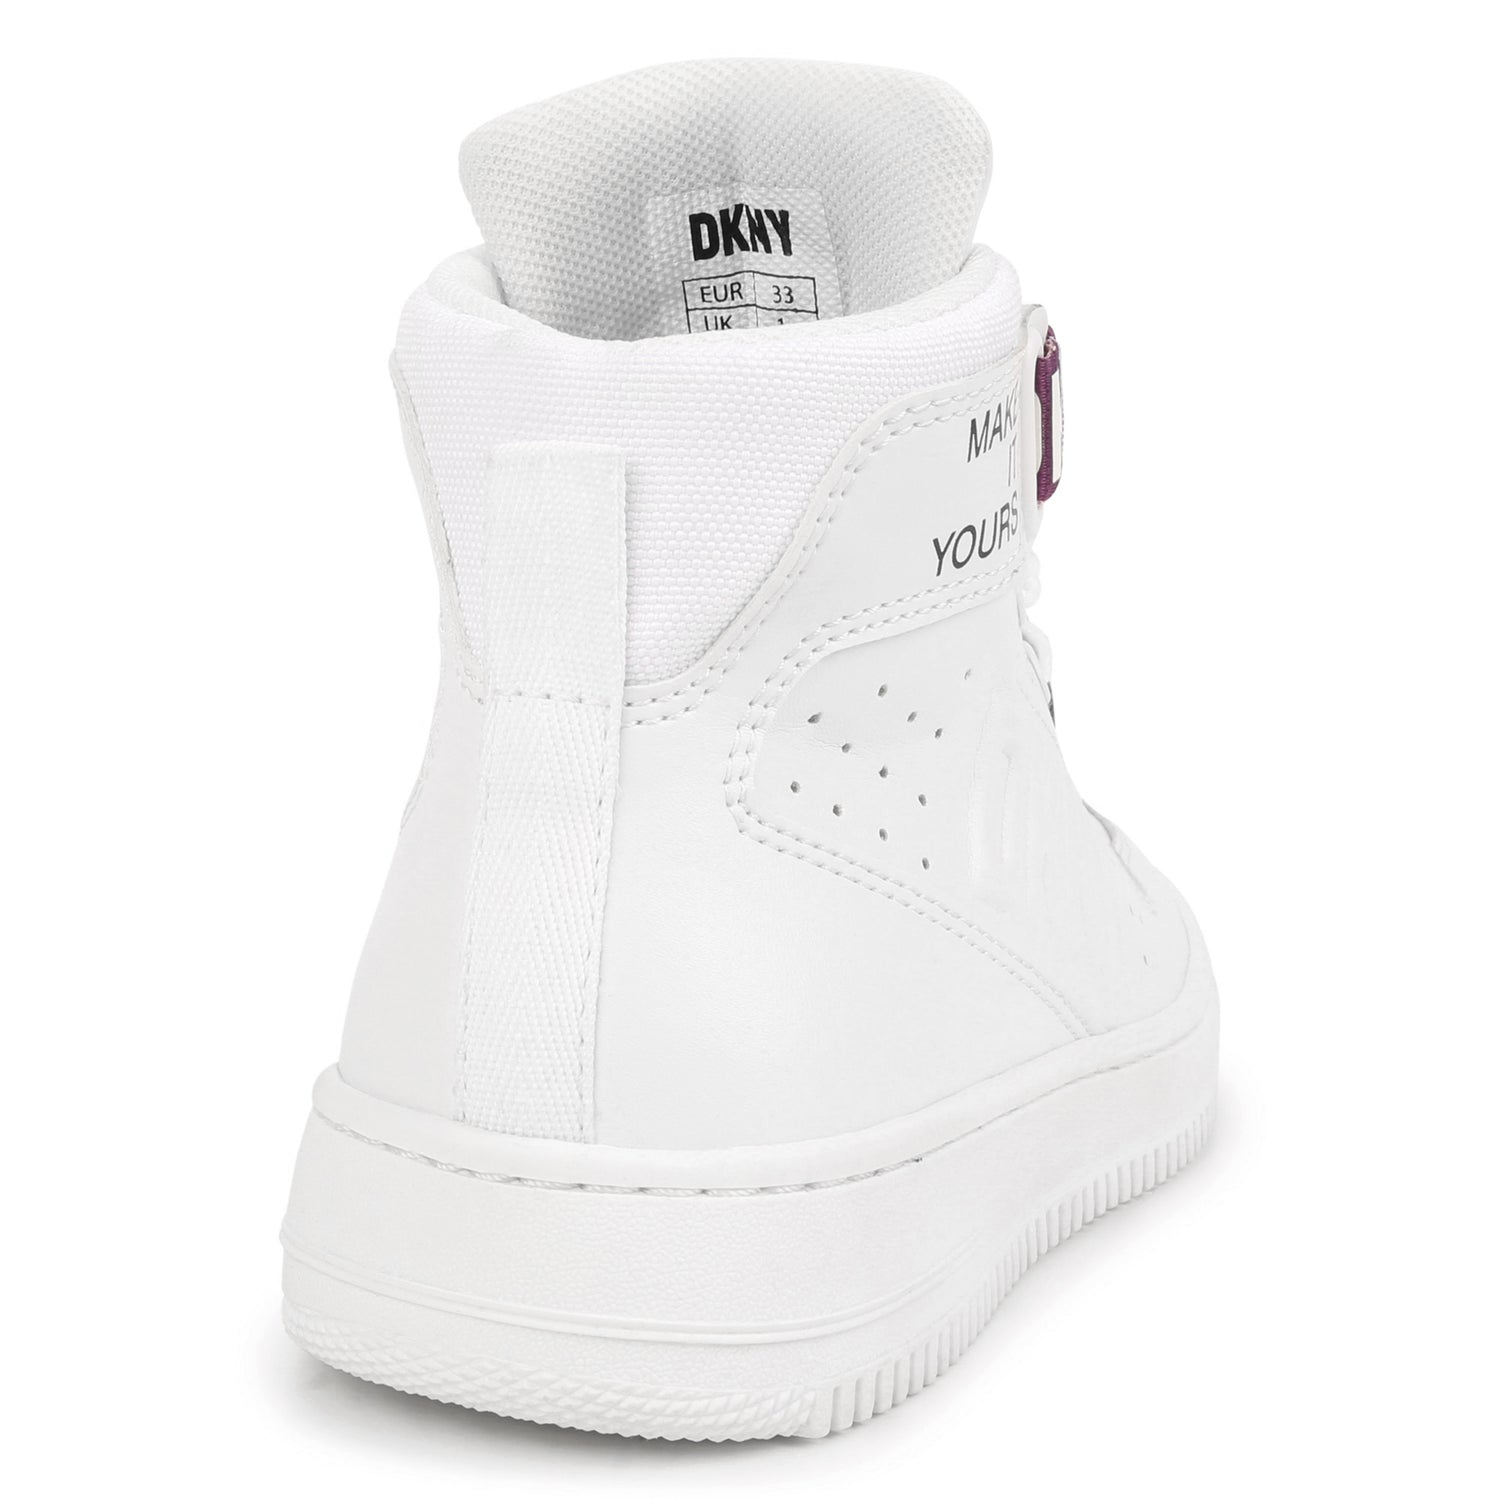 Dkny Trainers Style: D59002